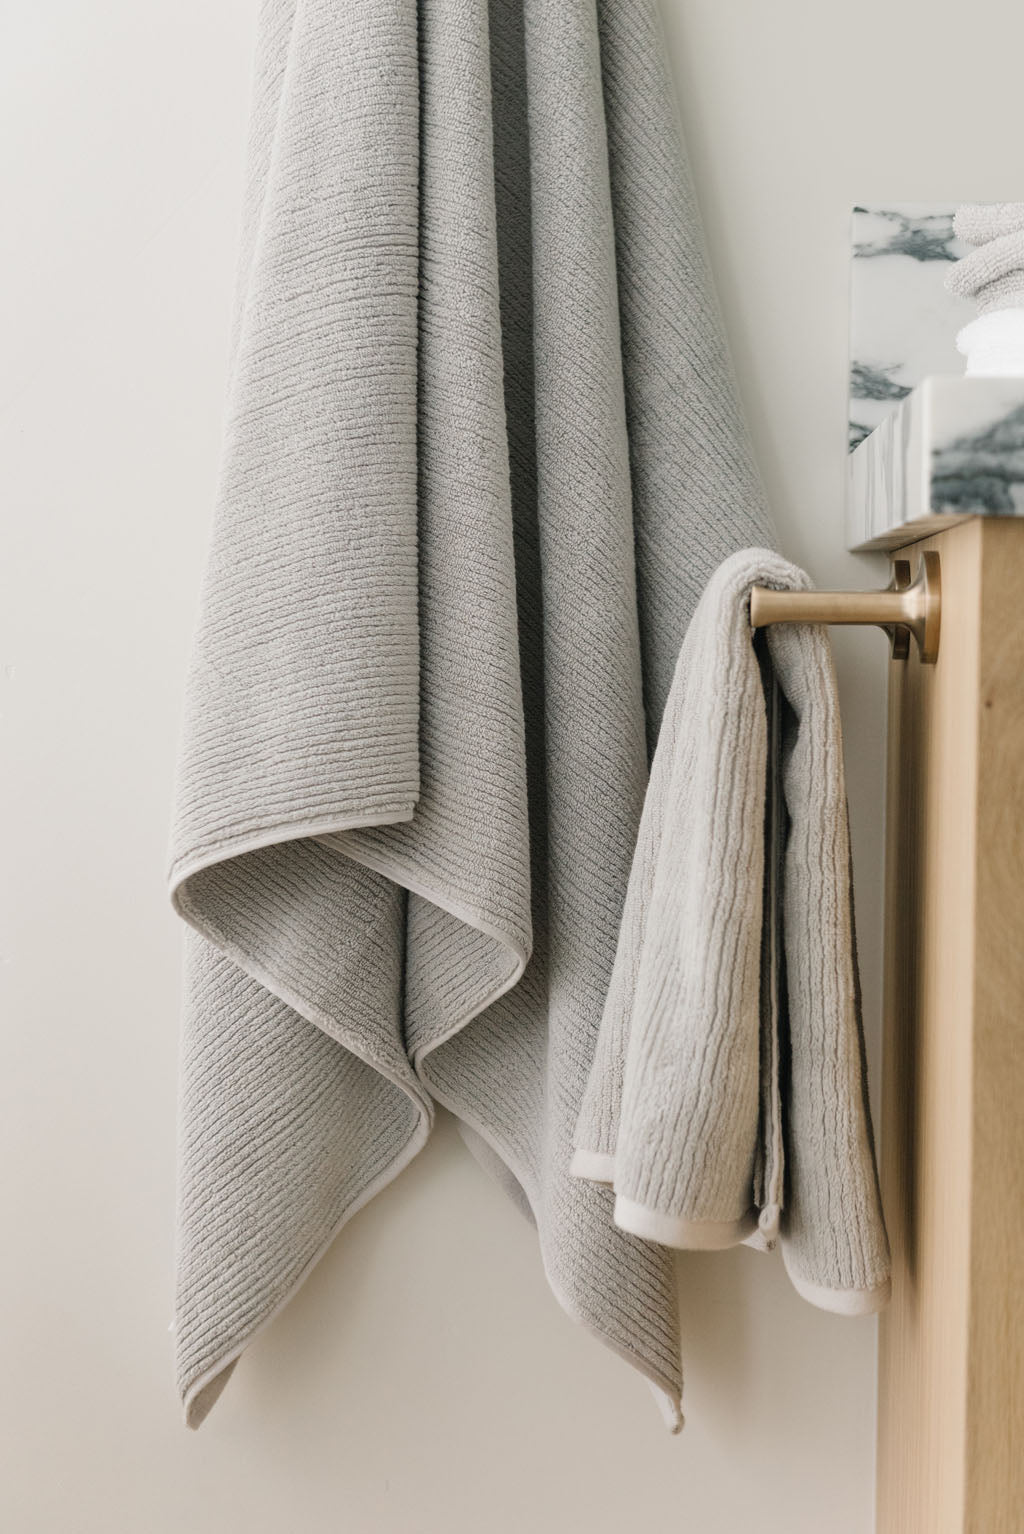 Ribbed Terry Bath Towel and Hand Towel in the color Light Grey. Photo of Ribbed Terry Bath Towel and Hand Towel taken as the Light Grey Ribbed Terry Bath Towel and Hand Towel is hanging from a towel hook in a bathroom. 